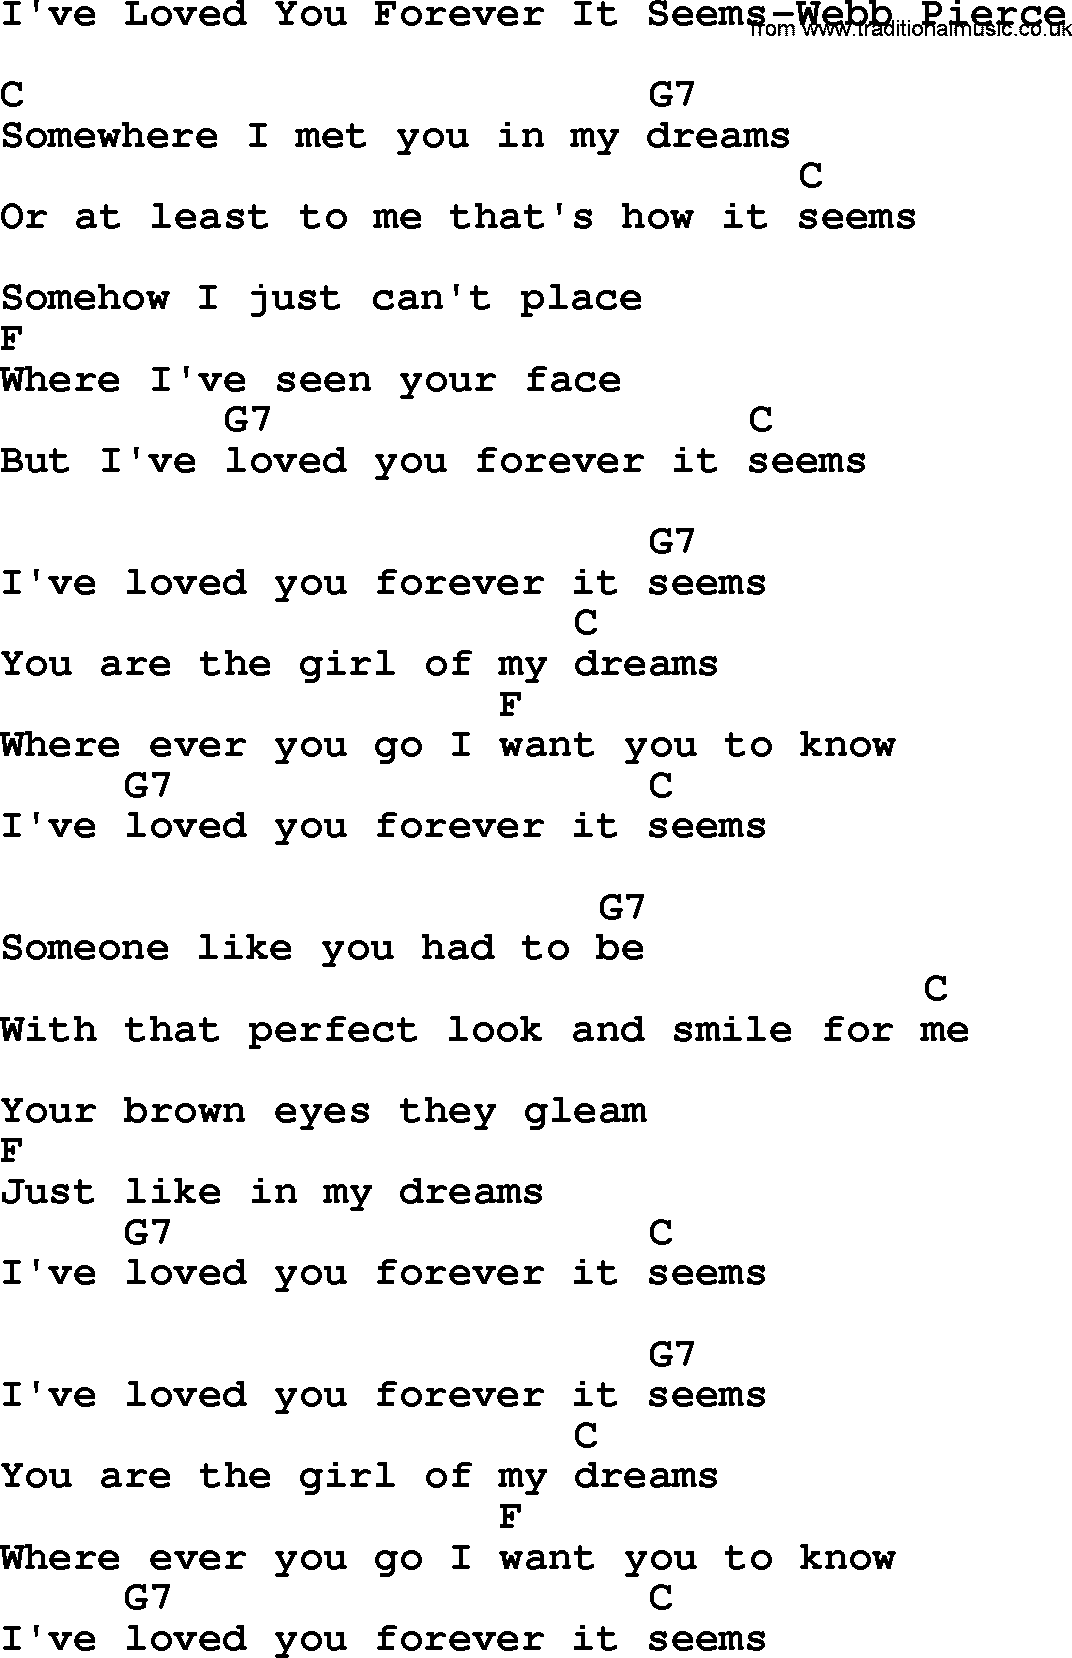 Country music song: I've Loved You Forever It Seems-Webb Pierce lyrics and chords